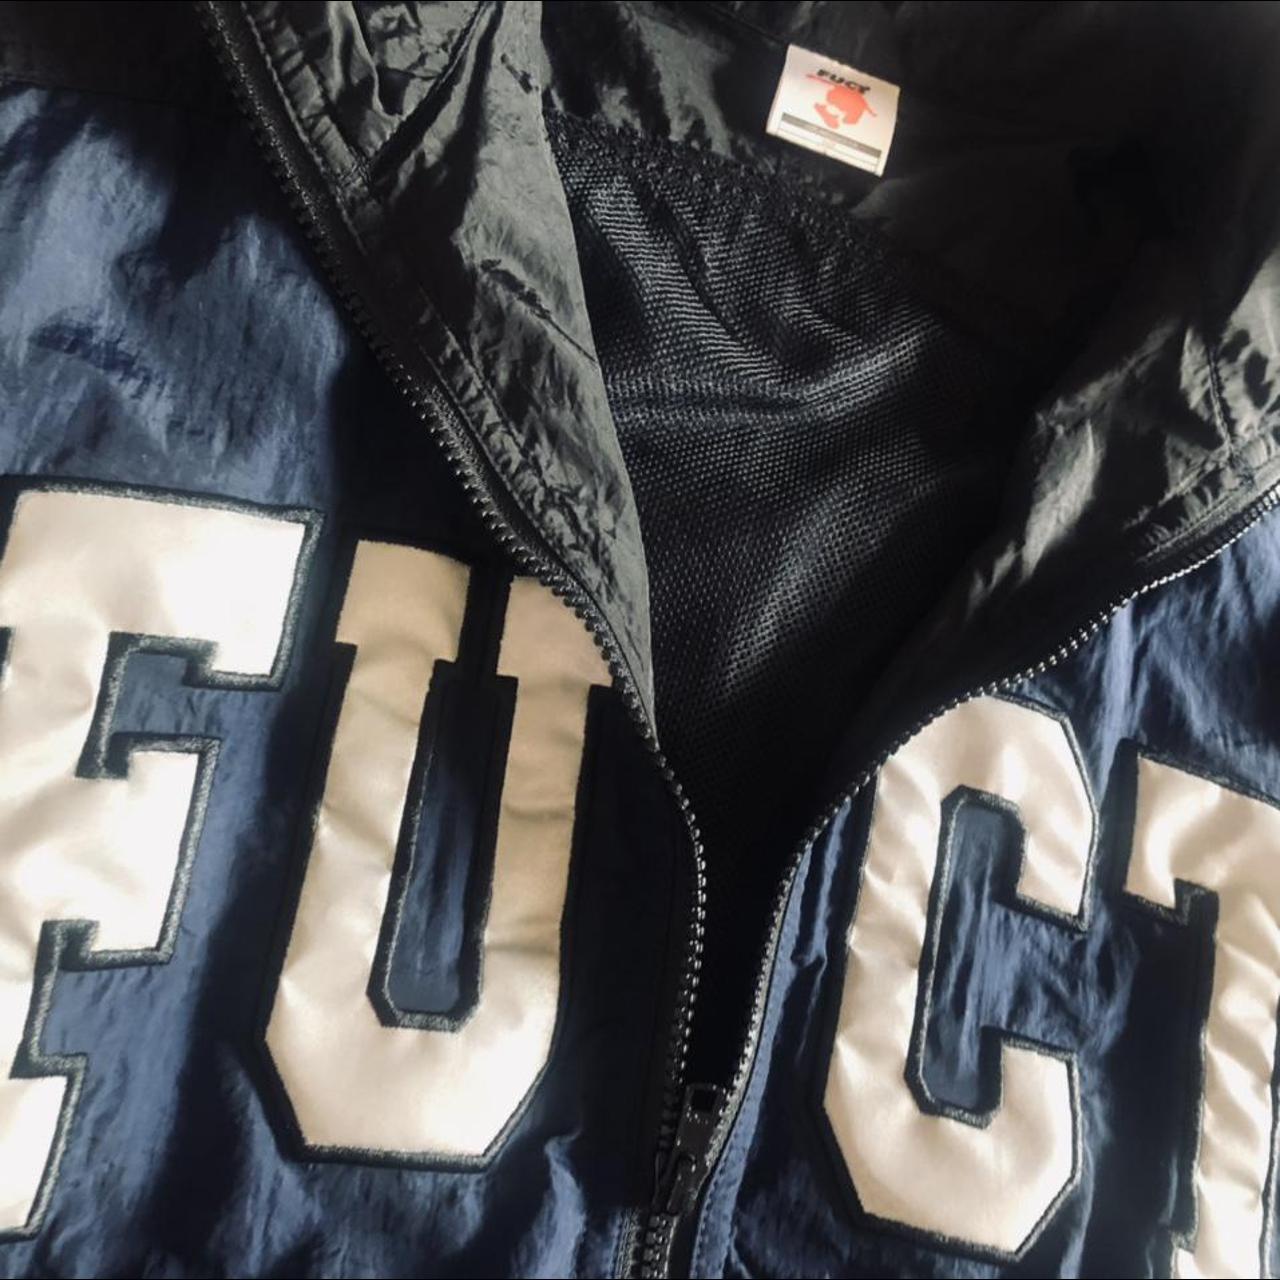 Product Image 3 - Fuct/SSDD Reflective Collegiate Track Jacket

Premium